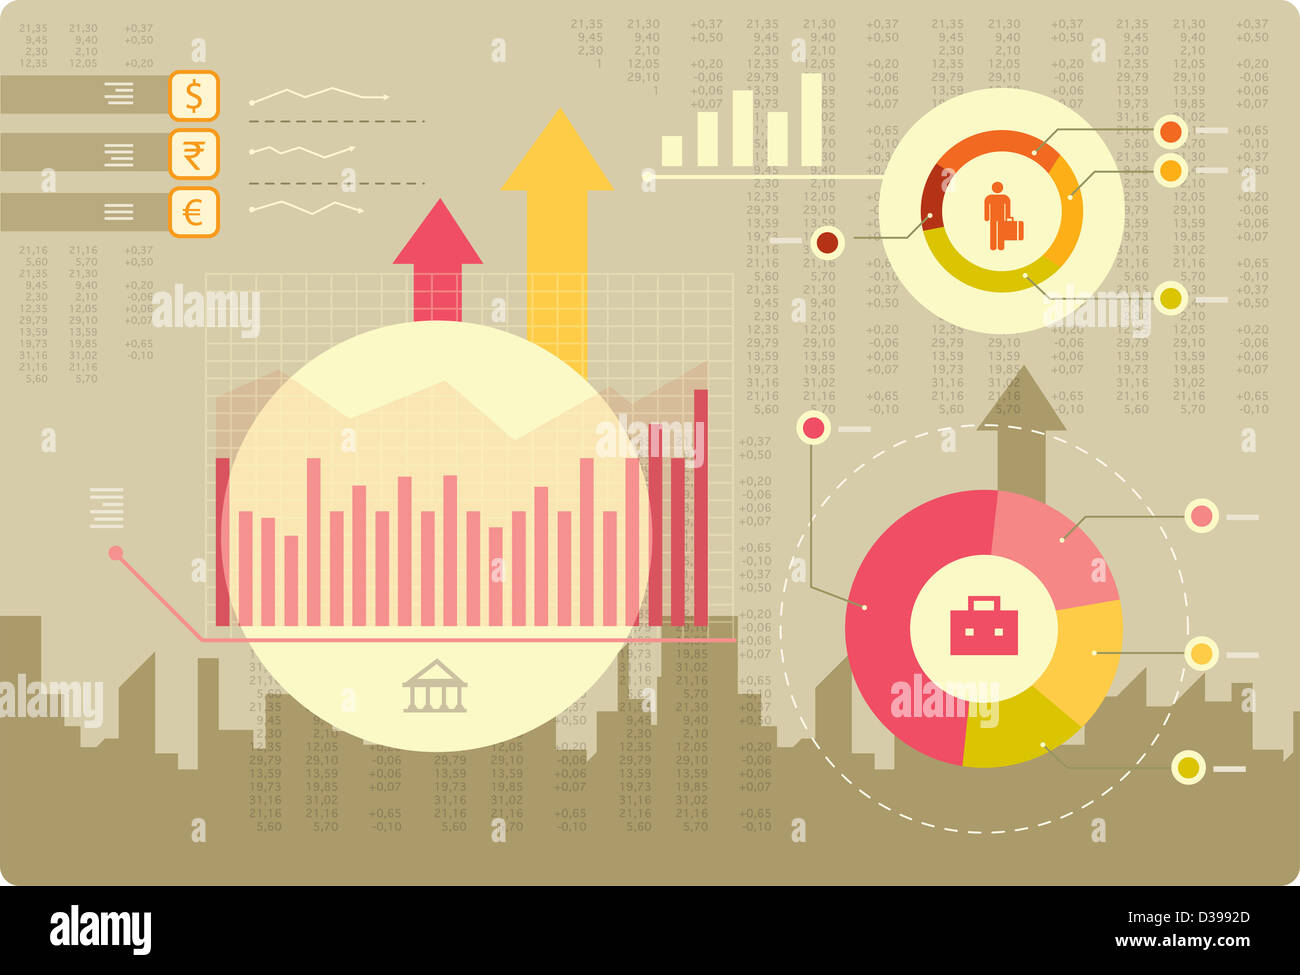 Illustrative image of share market in infographic style Stock Photo